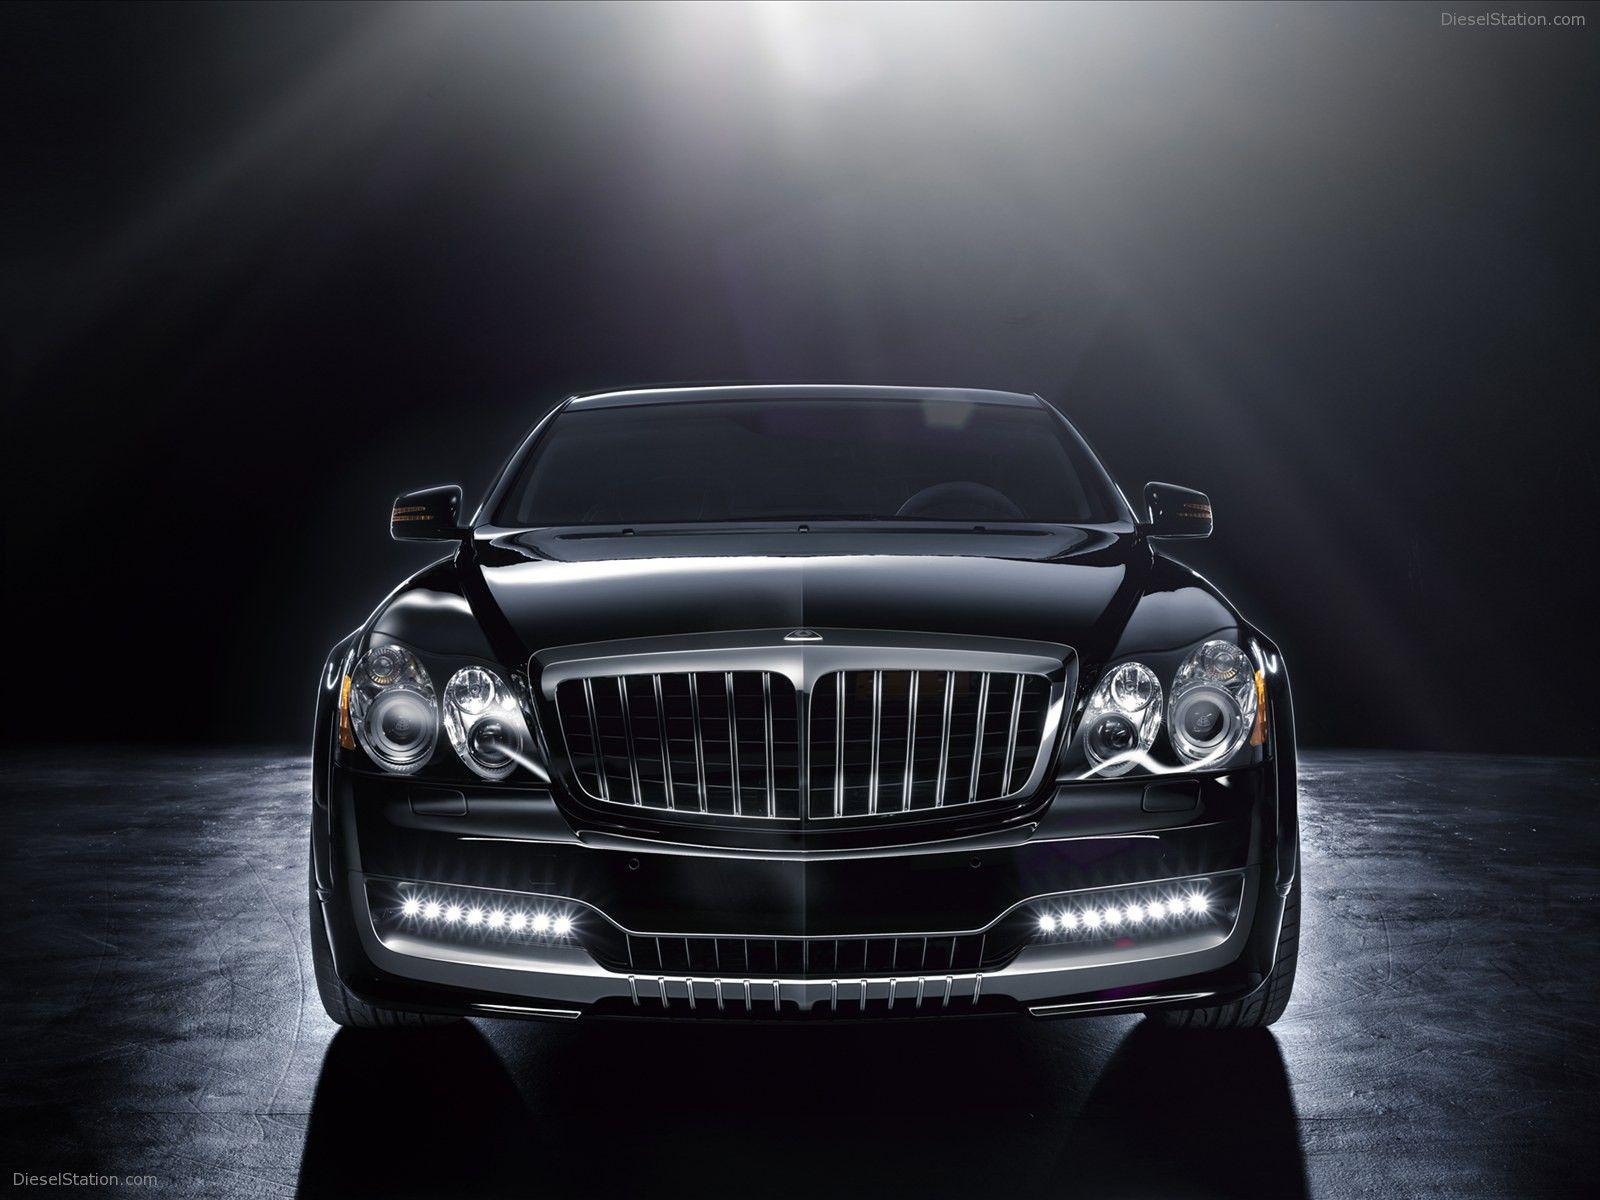 Xenatec Maybach Coupe 2010 Exotic Car Wallpaper of 10, Diesel